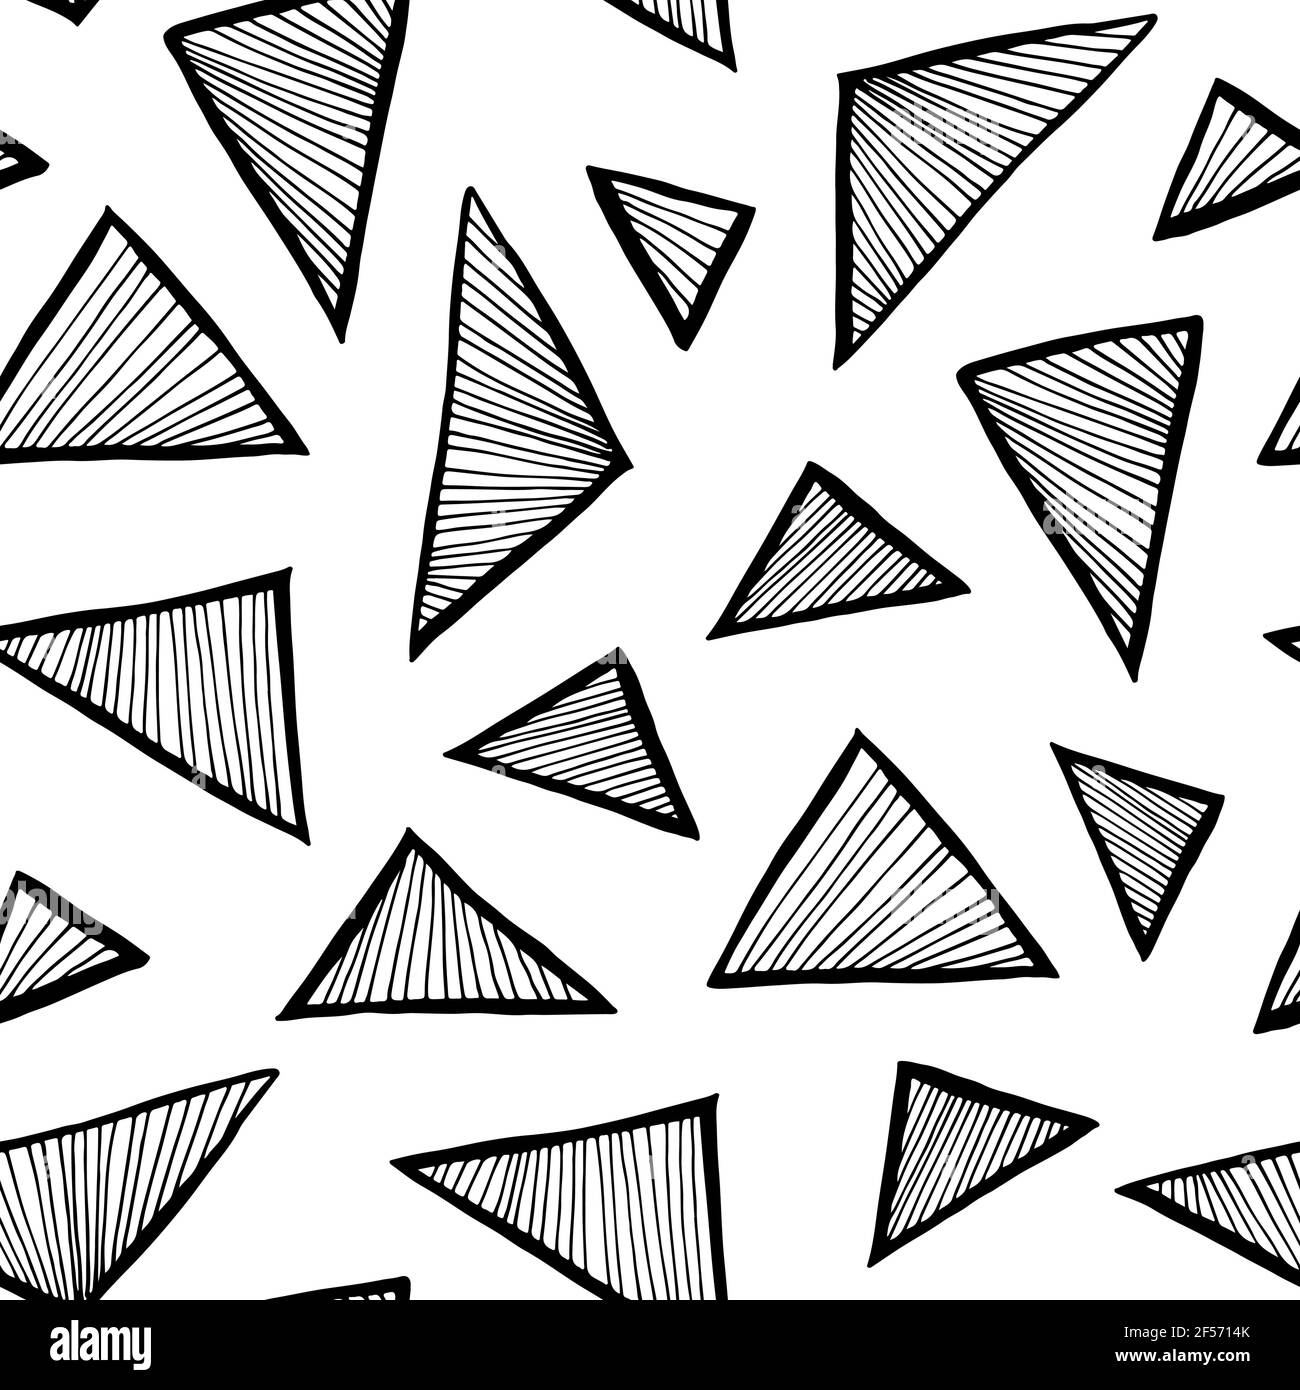 Triangle seamless vector pattern, simple doodle hand drawn